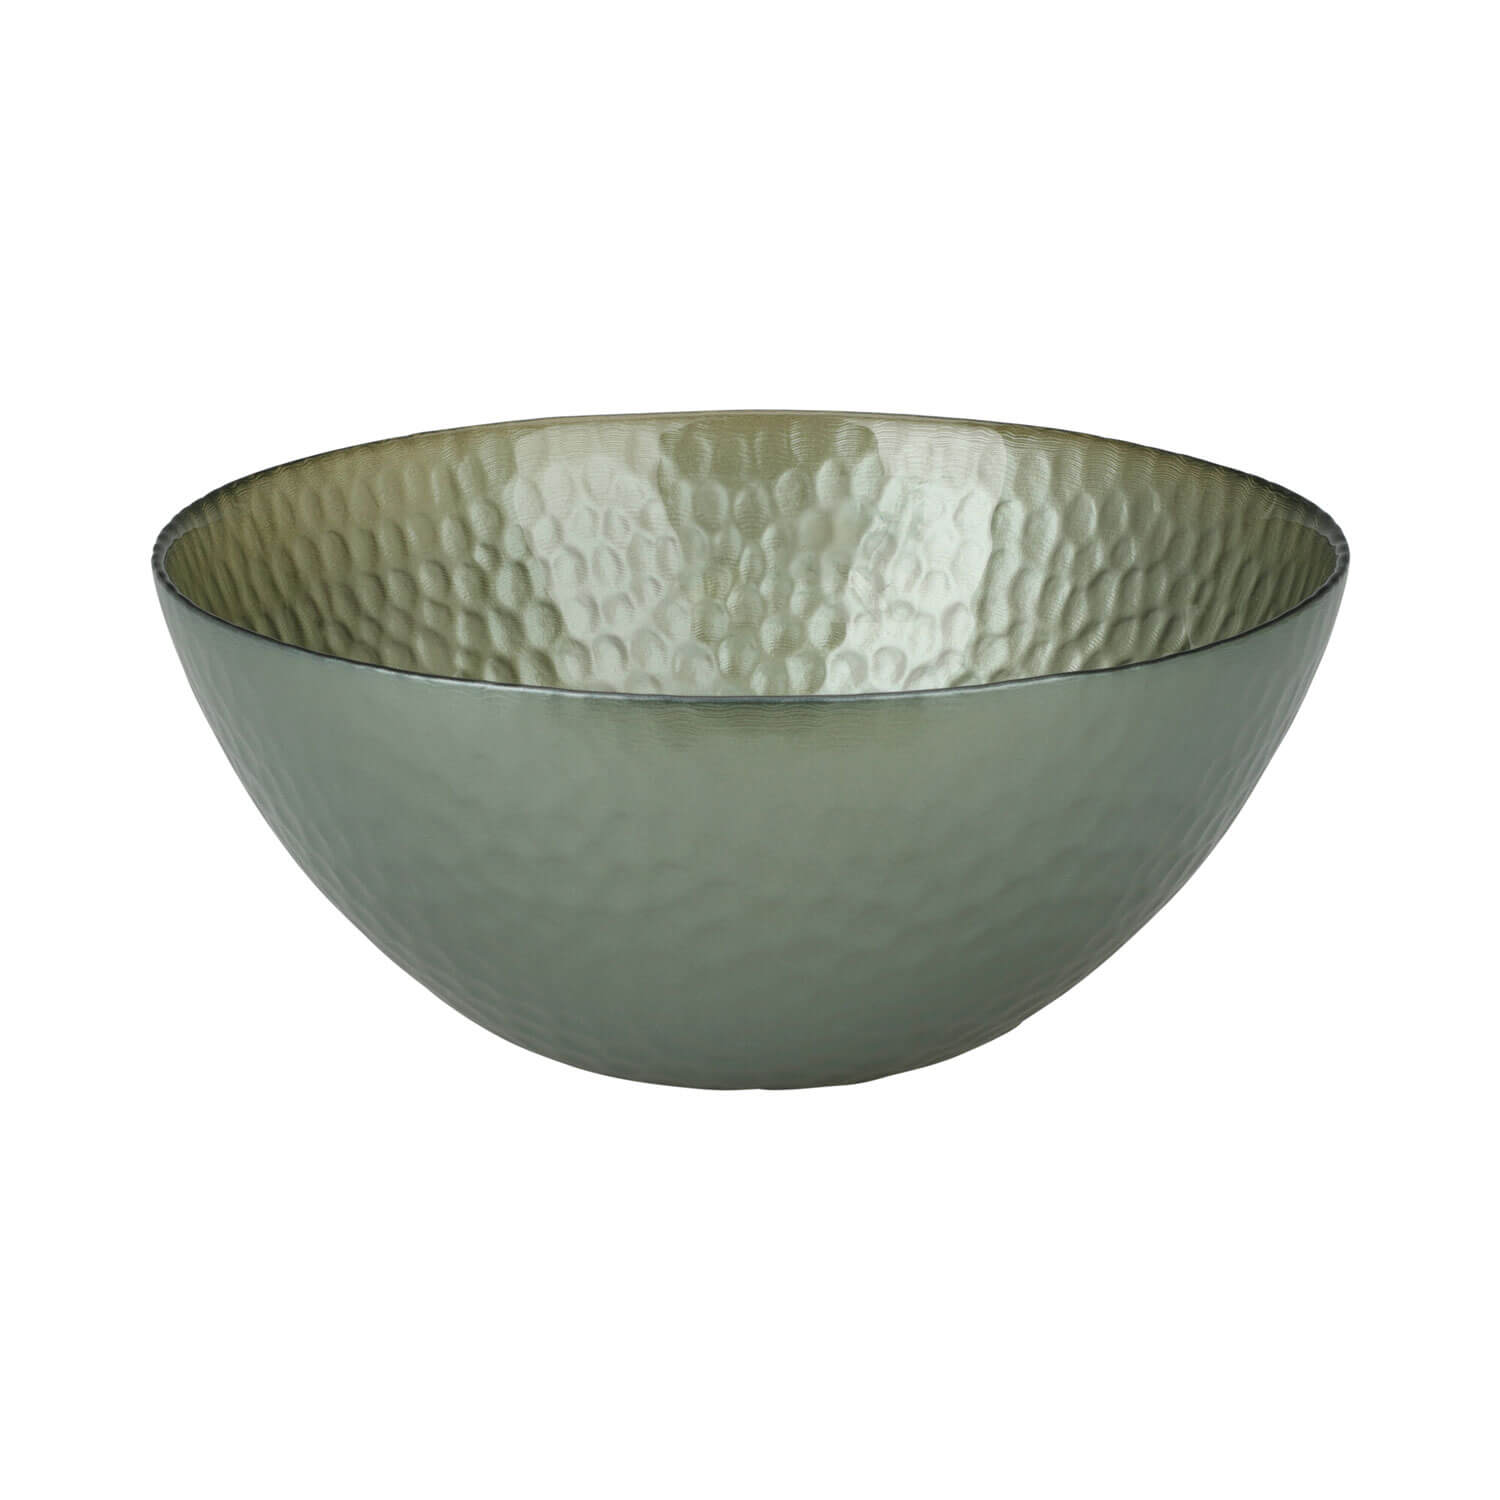 The Home Kitchen Glass Bowl - Light Green 1 Shaws Department Stores